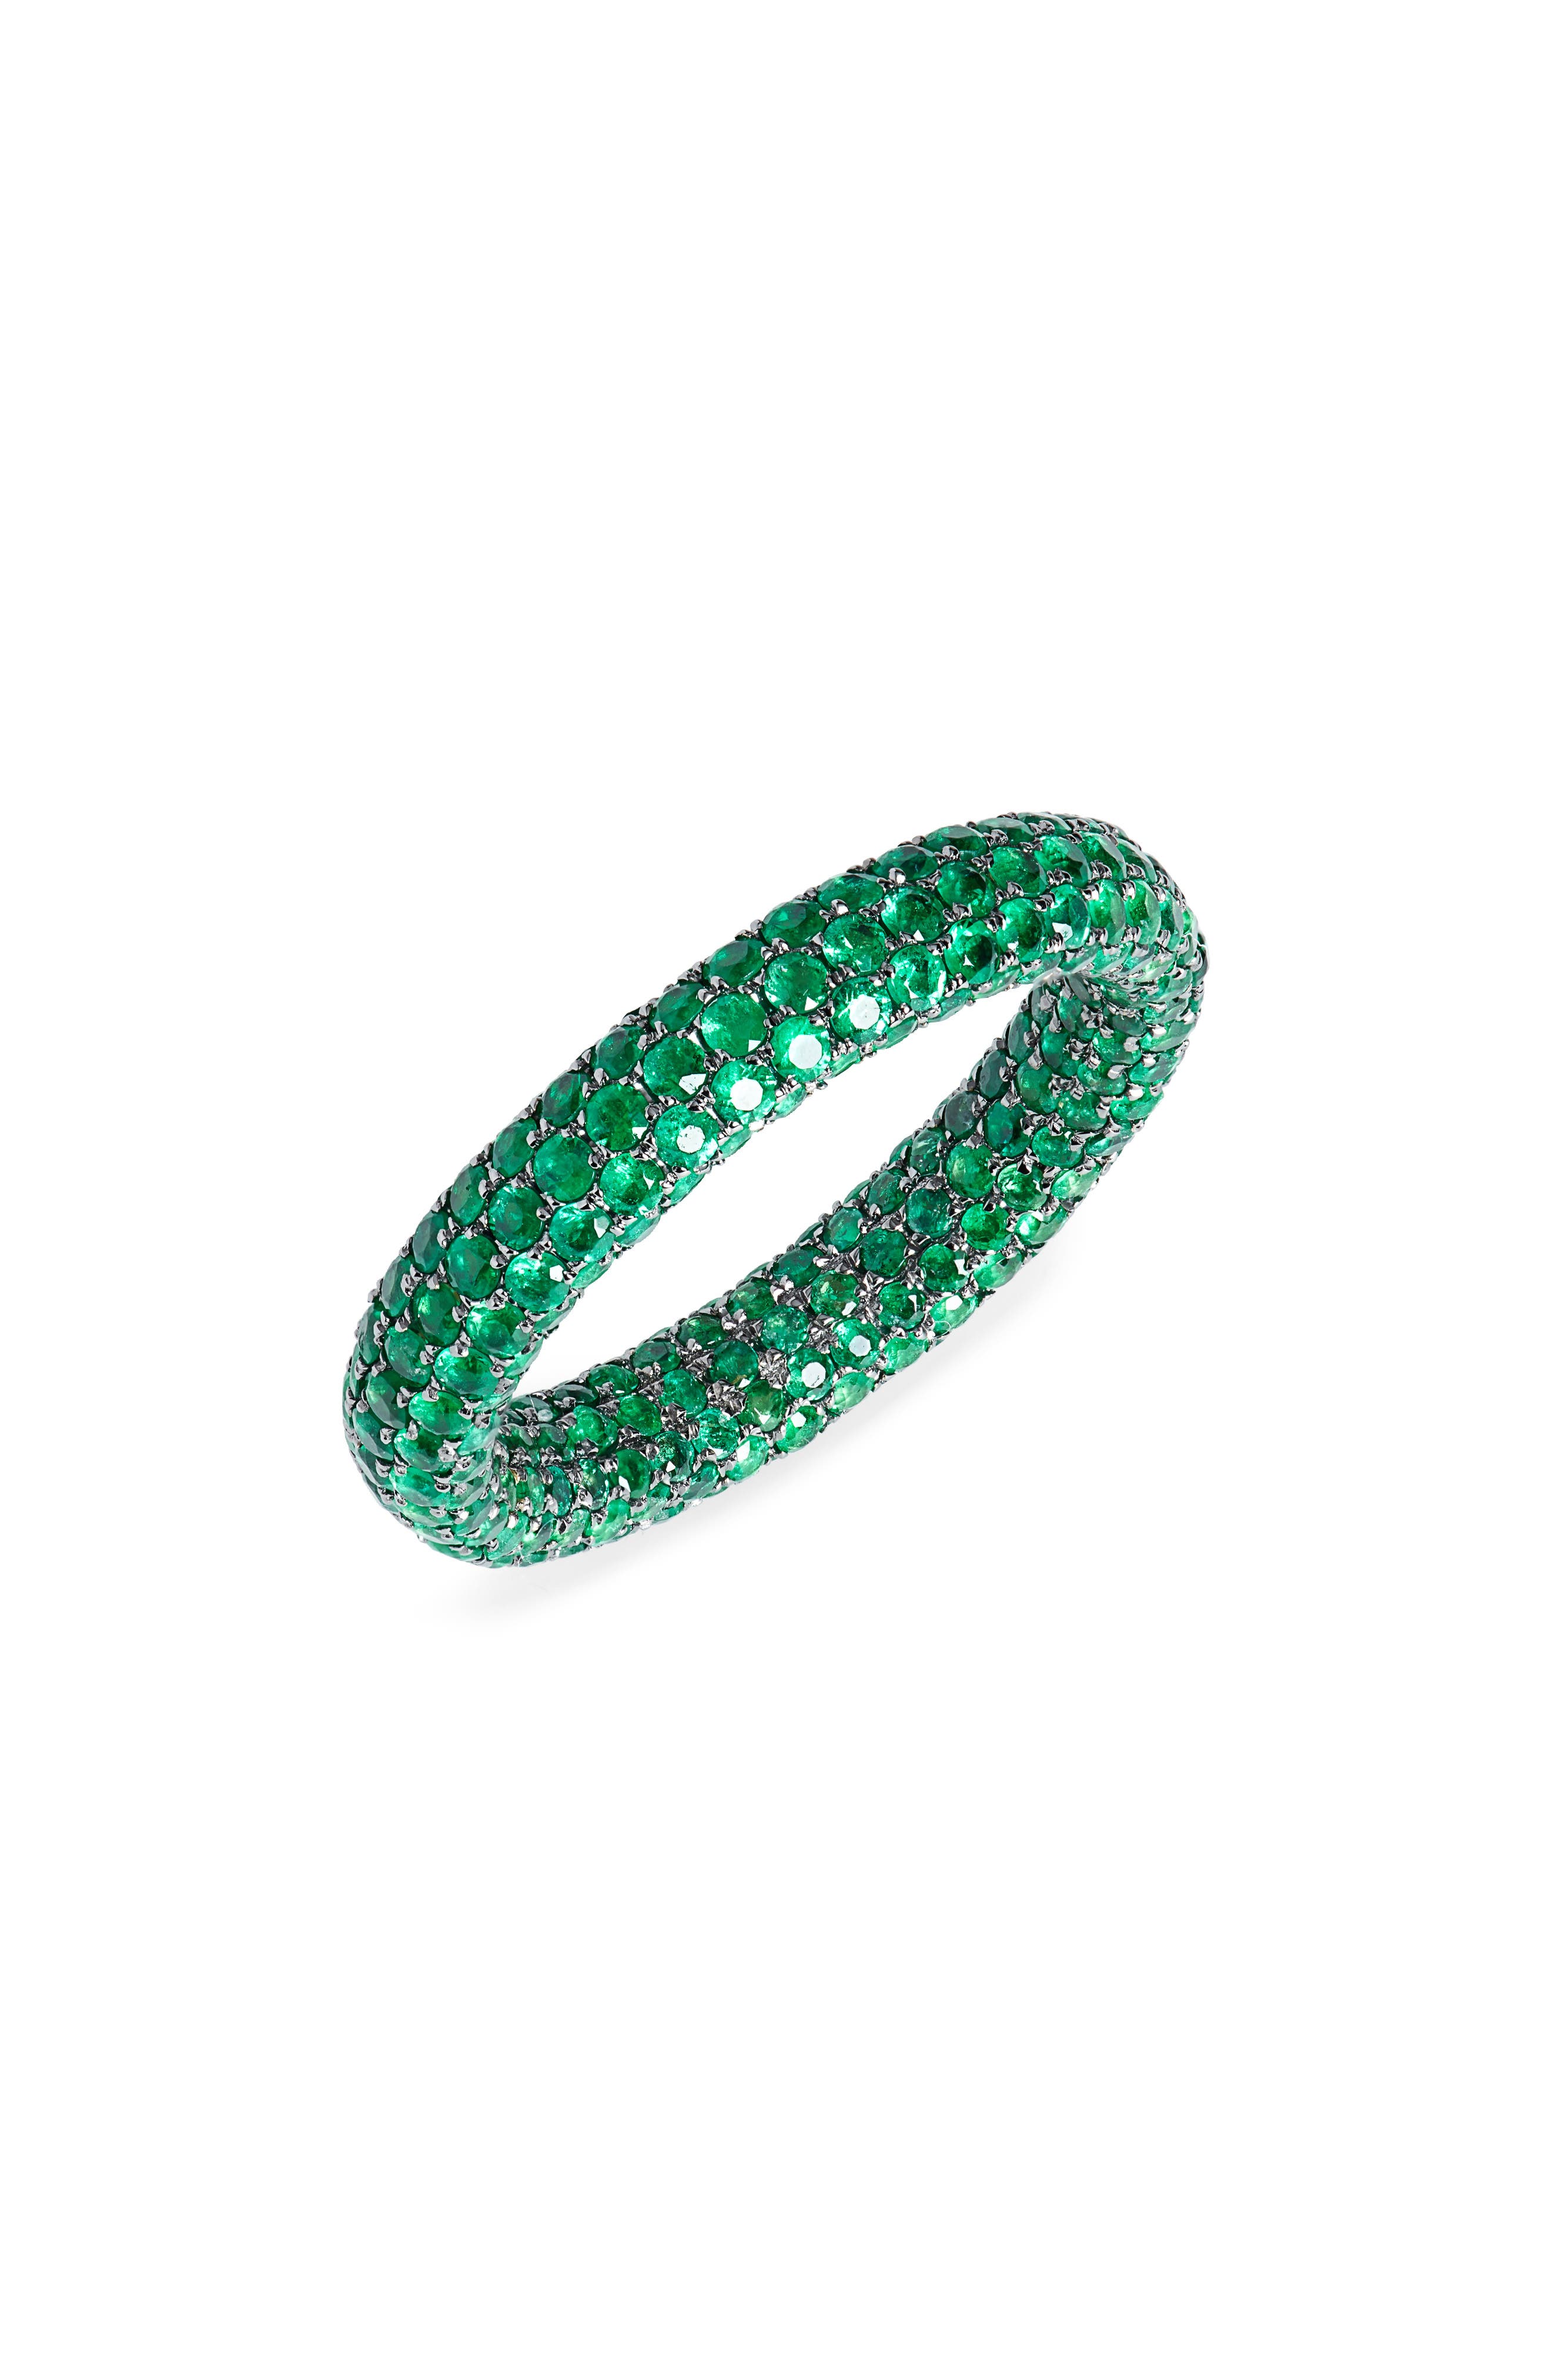 SHAY Emerald Inside & Out Ring in Emerald/black at Nordstrom, Size 7 Us